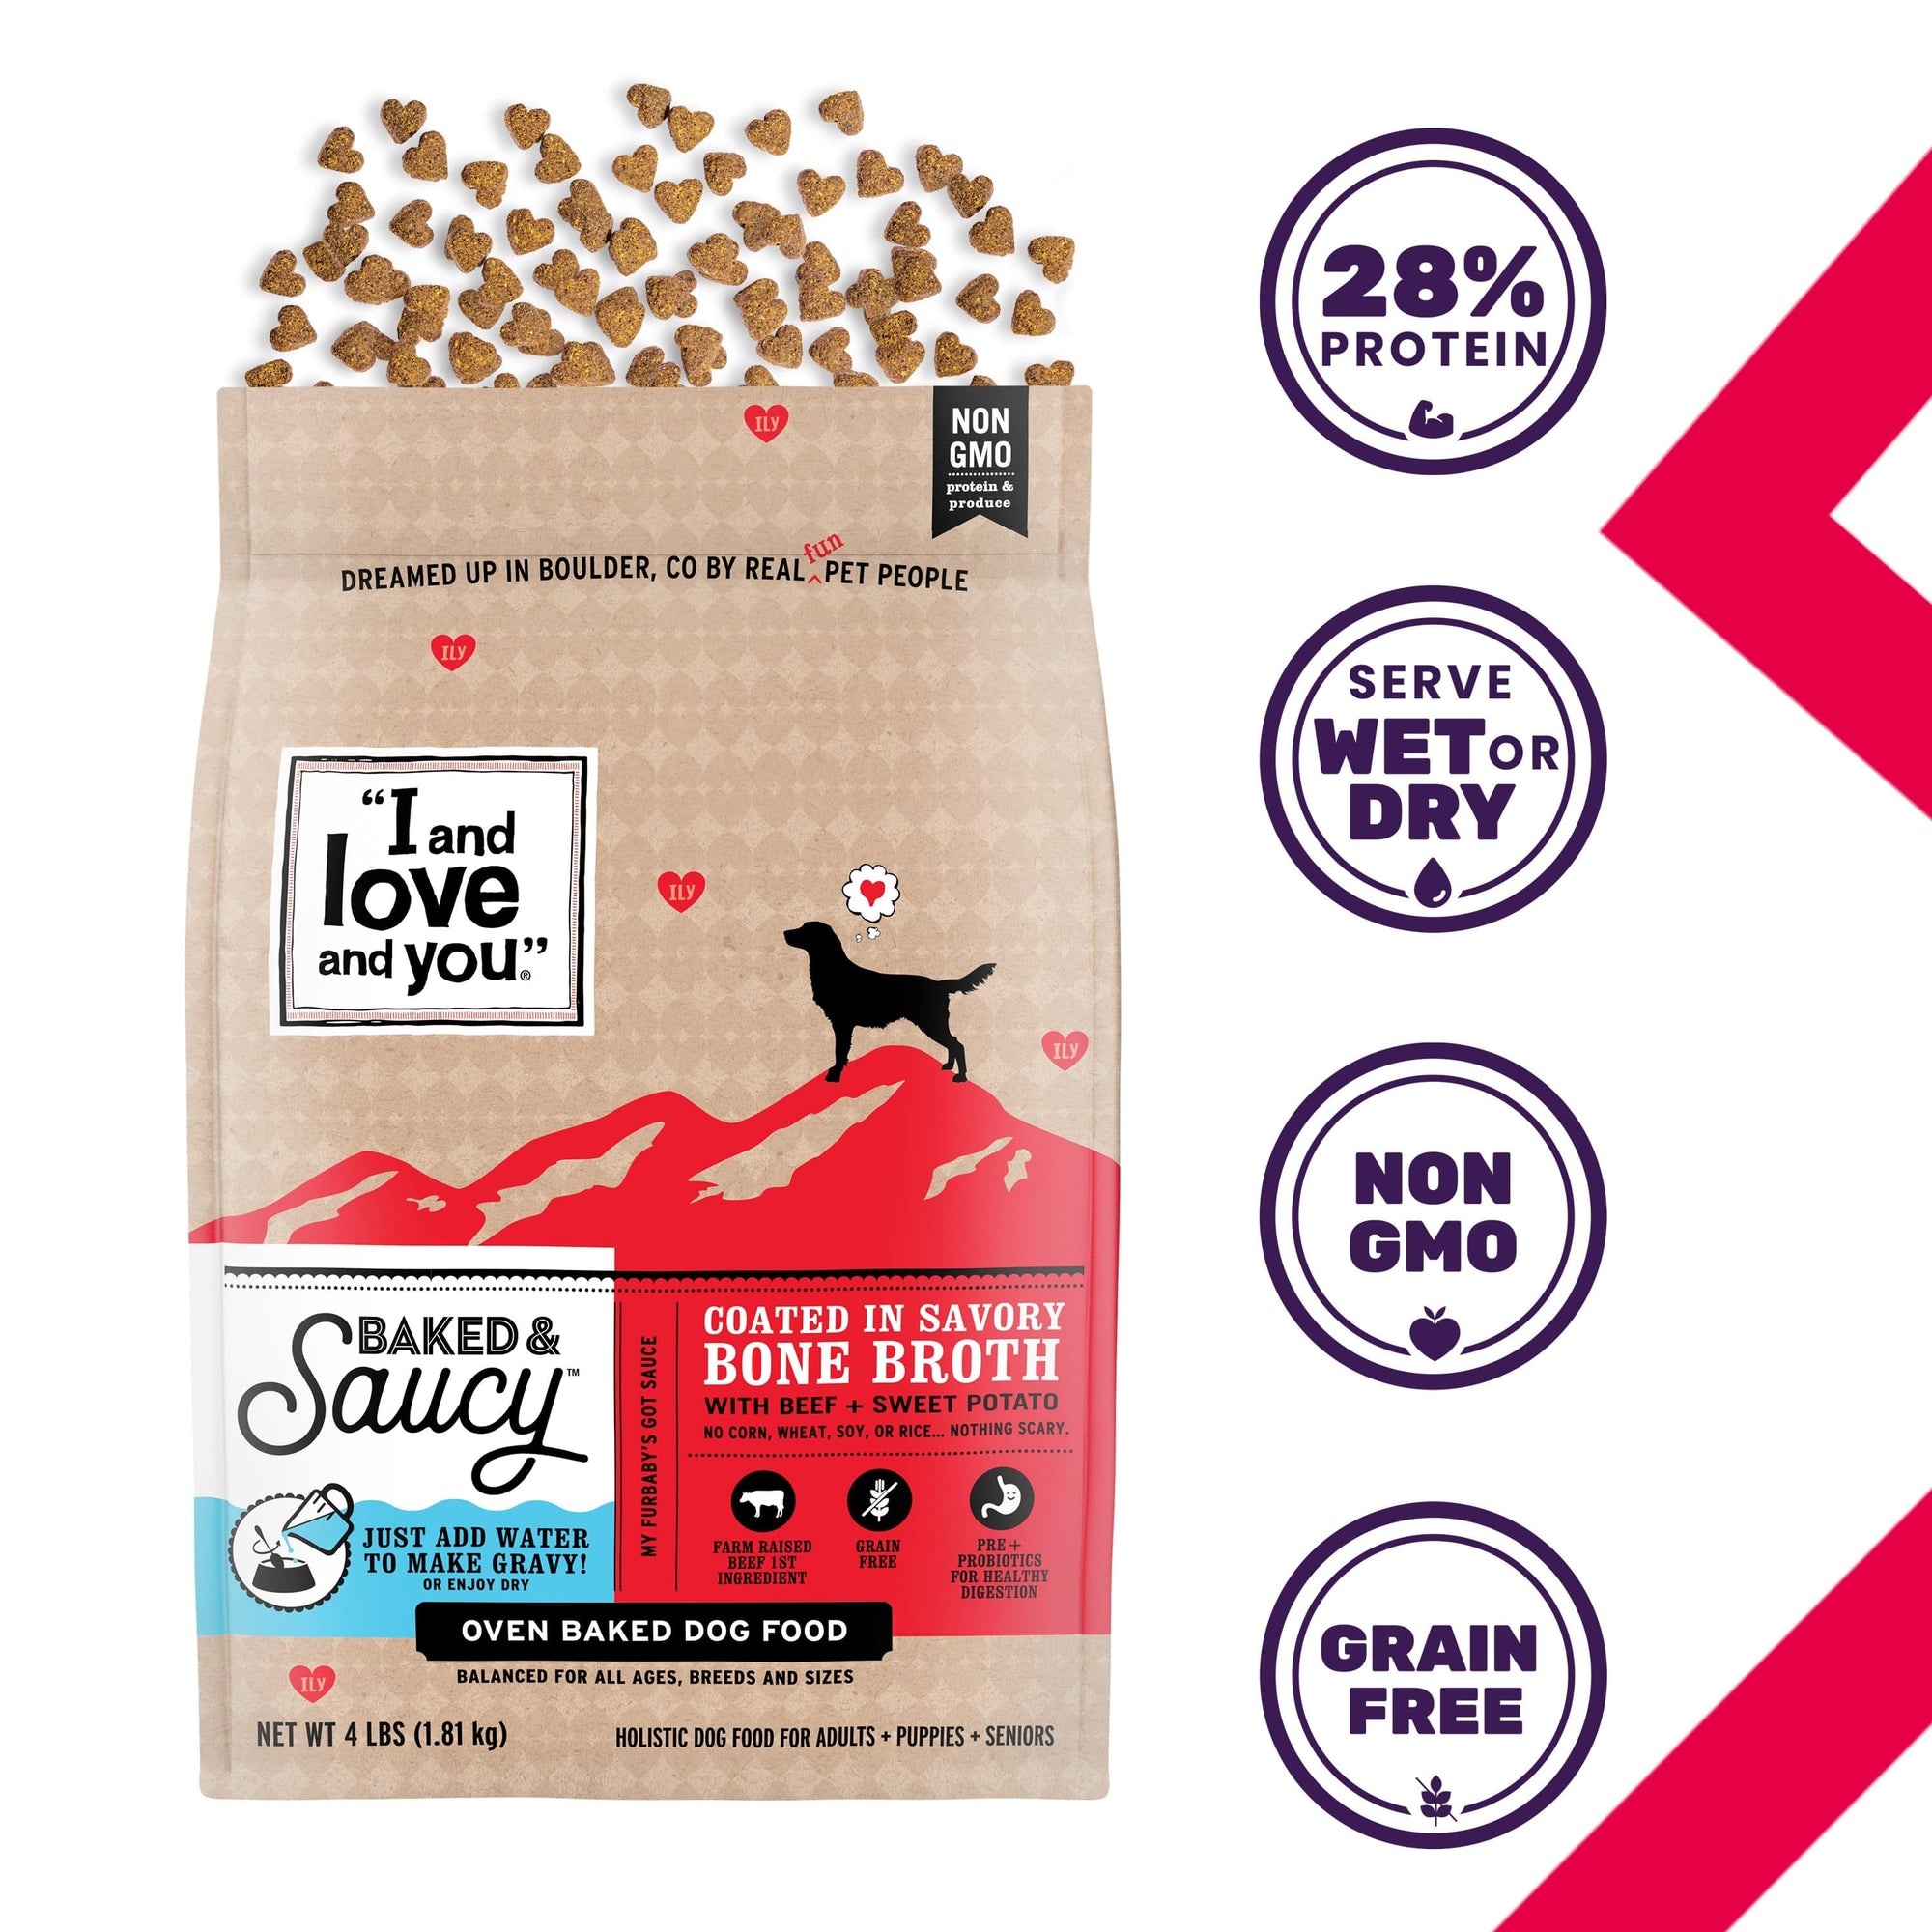 Baked & Saucy - Beef + Sweet Potato dog food bag with heart-shaped kibble and bone broth coating.